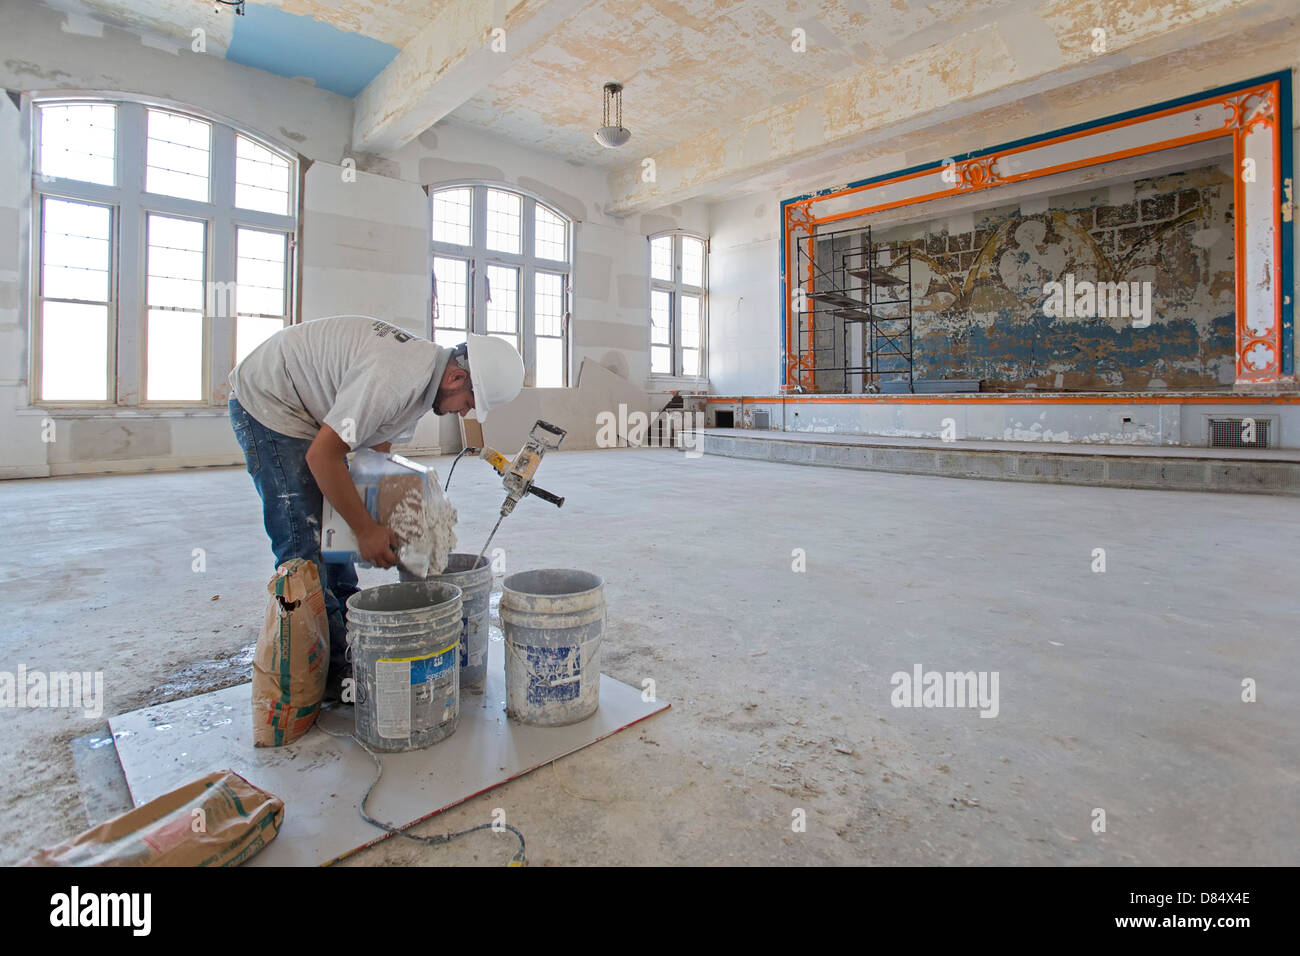 Workers renovate historic high school in Detroit Stock Photo